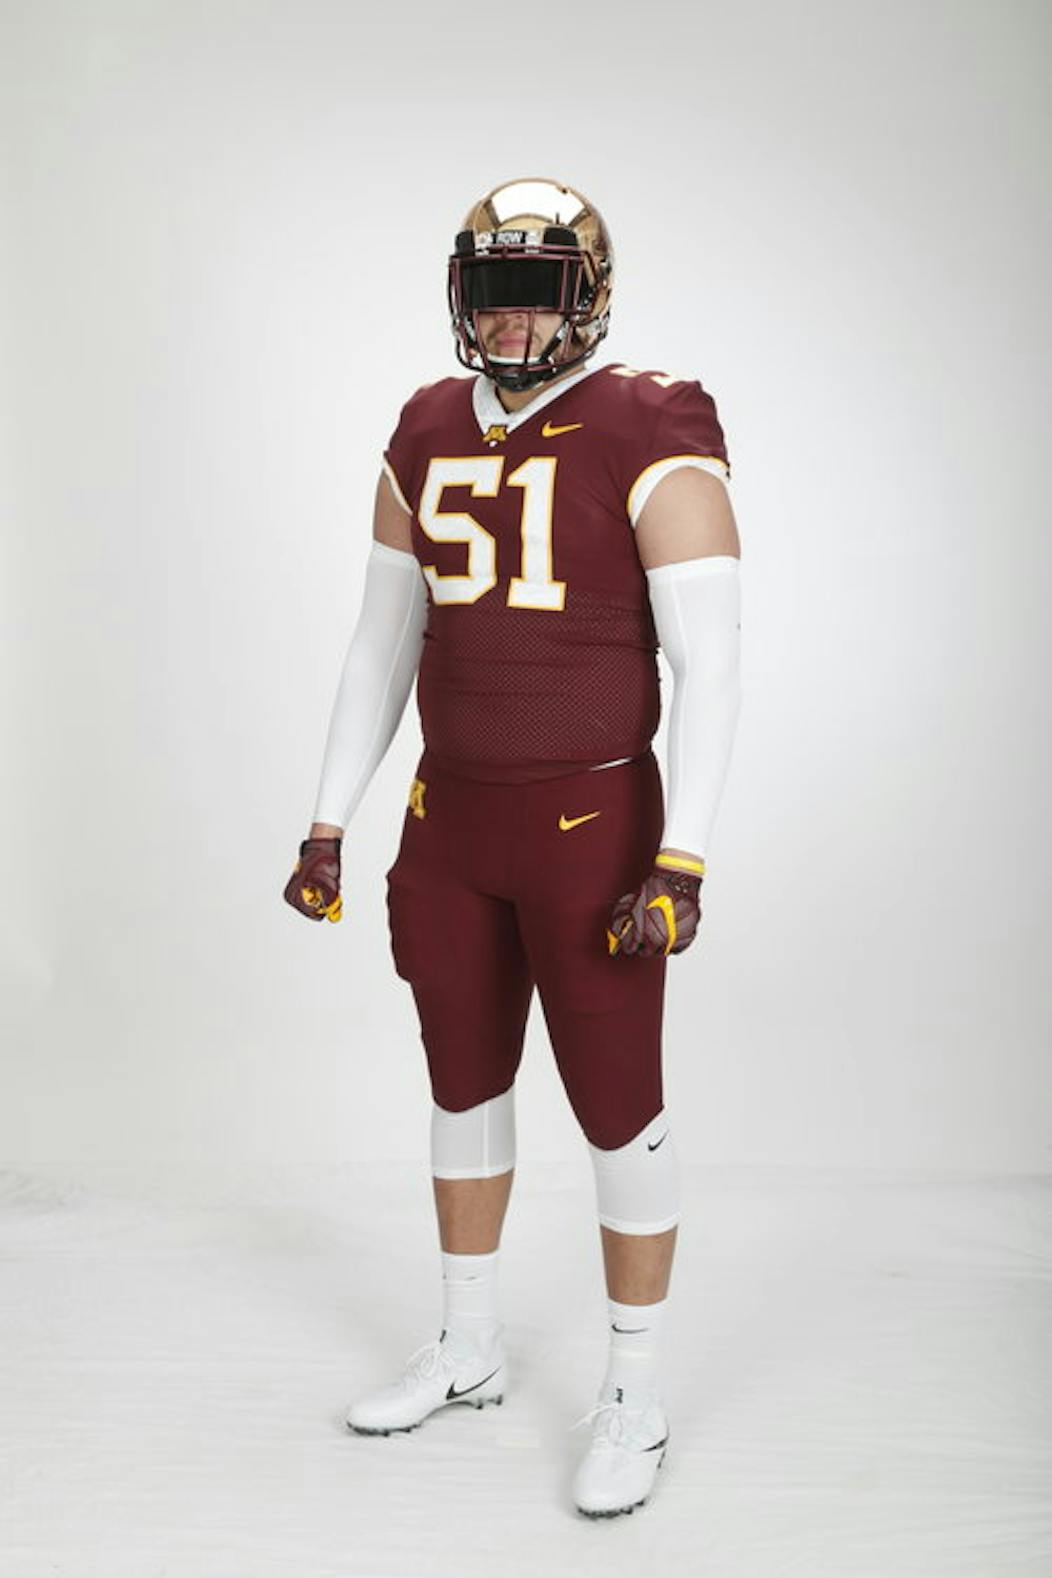 Kasson native had role in designing new Gophers football jerseys - Post  Bulletin